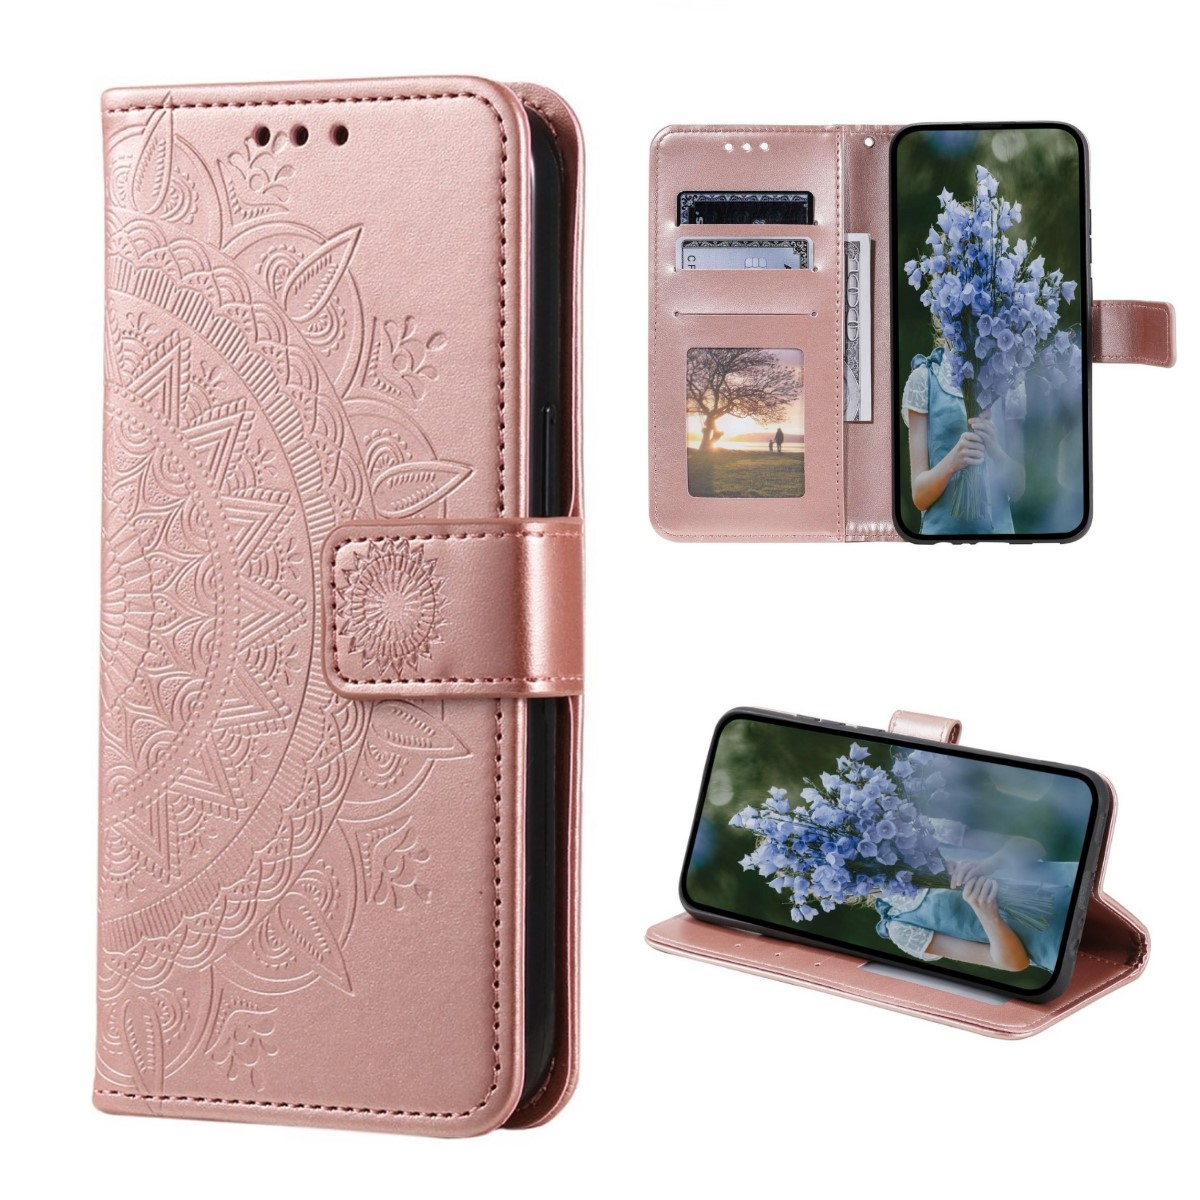 Muster, S23, COVERKINGZ Klapphülle Samsung, mit Galaxy Rosegold Bookcover, Mandala